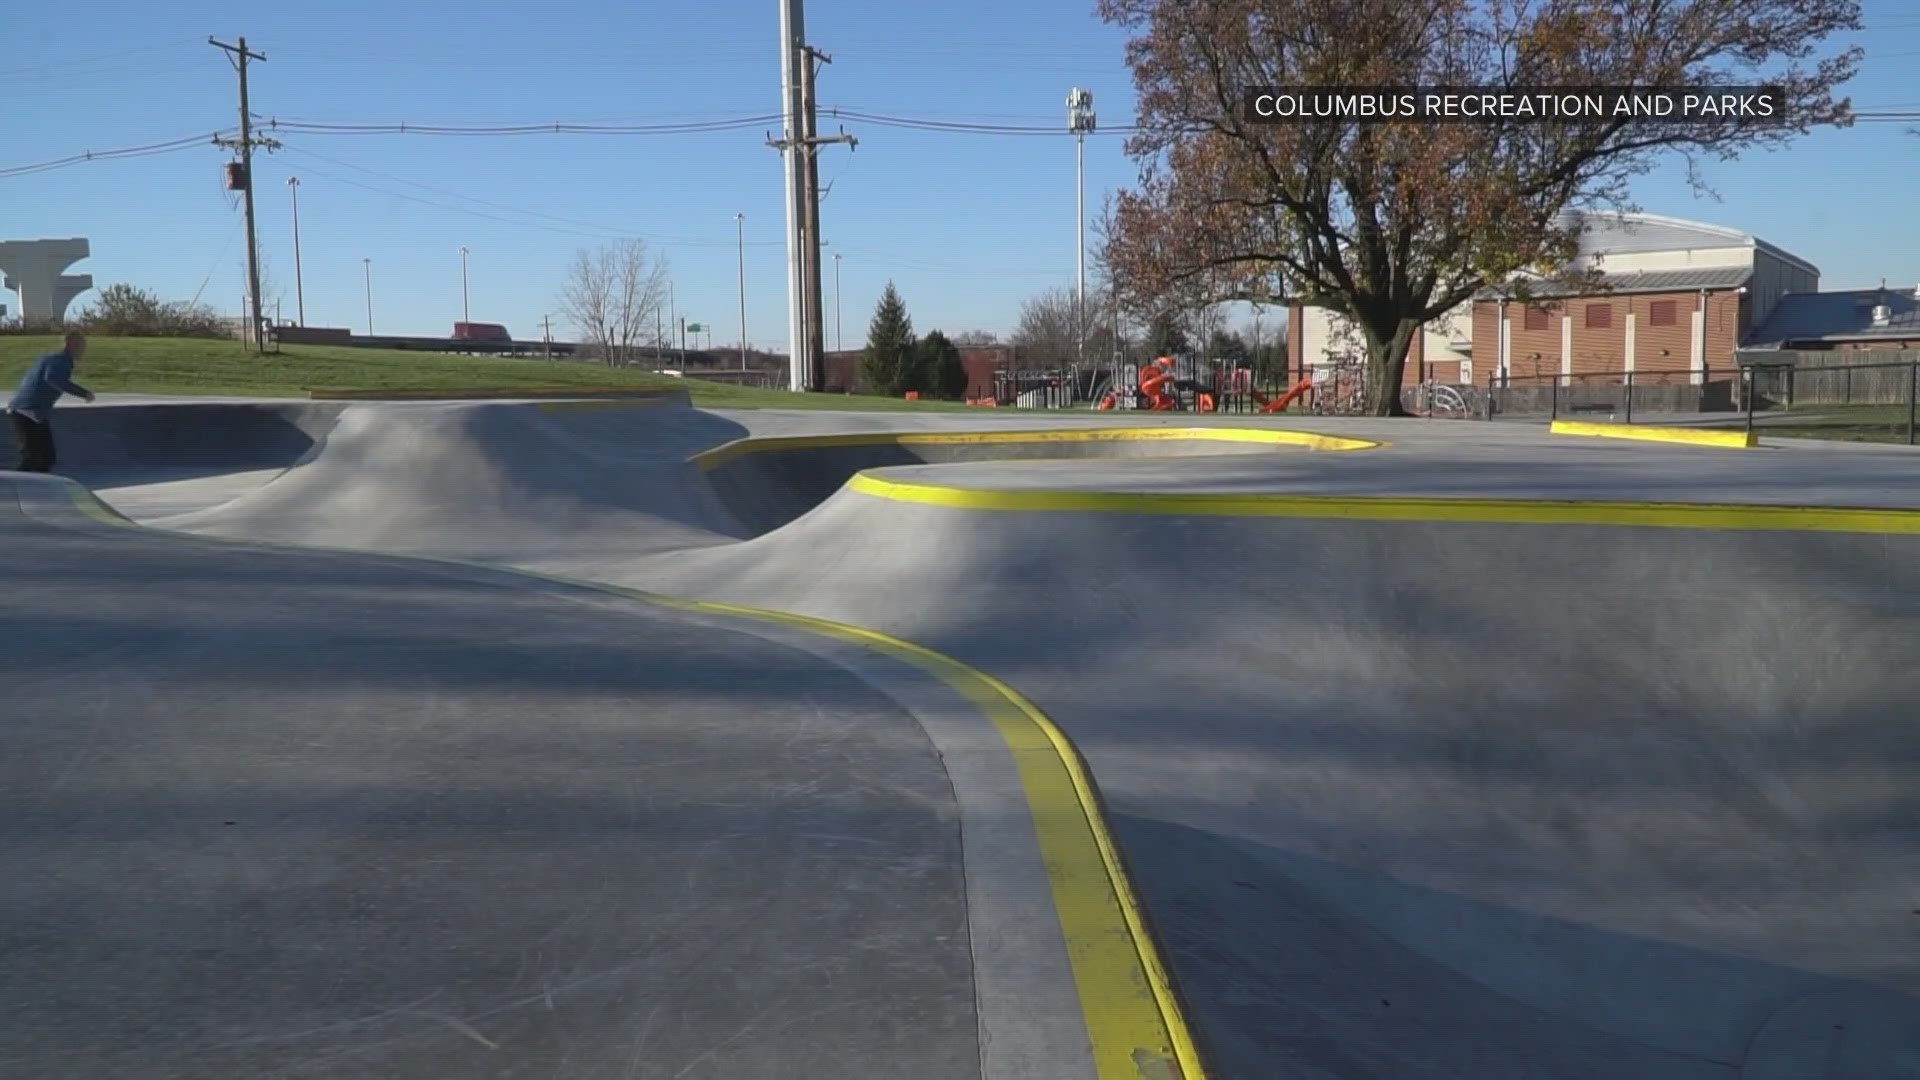 Dodge Skatepark recently underwent a rejuvenation and has reopened to the public following essential repairs.